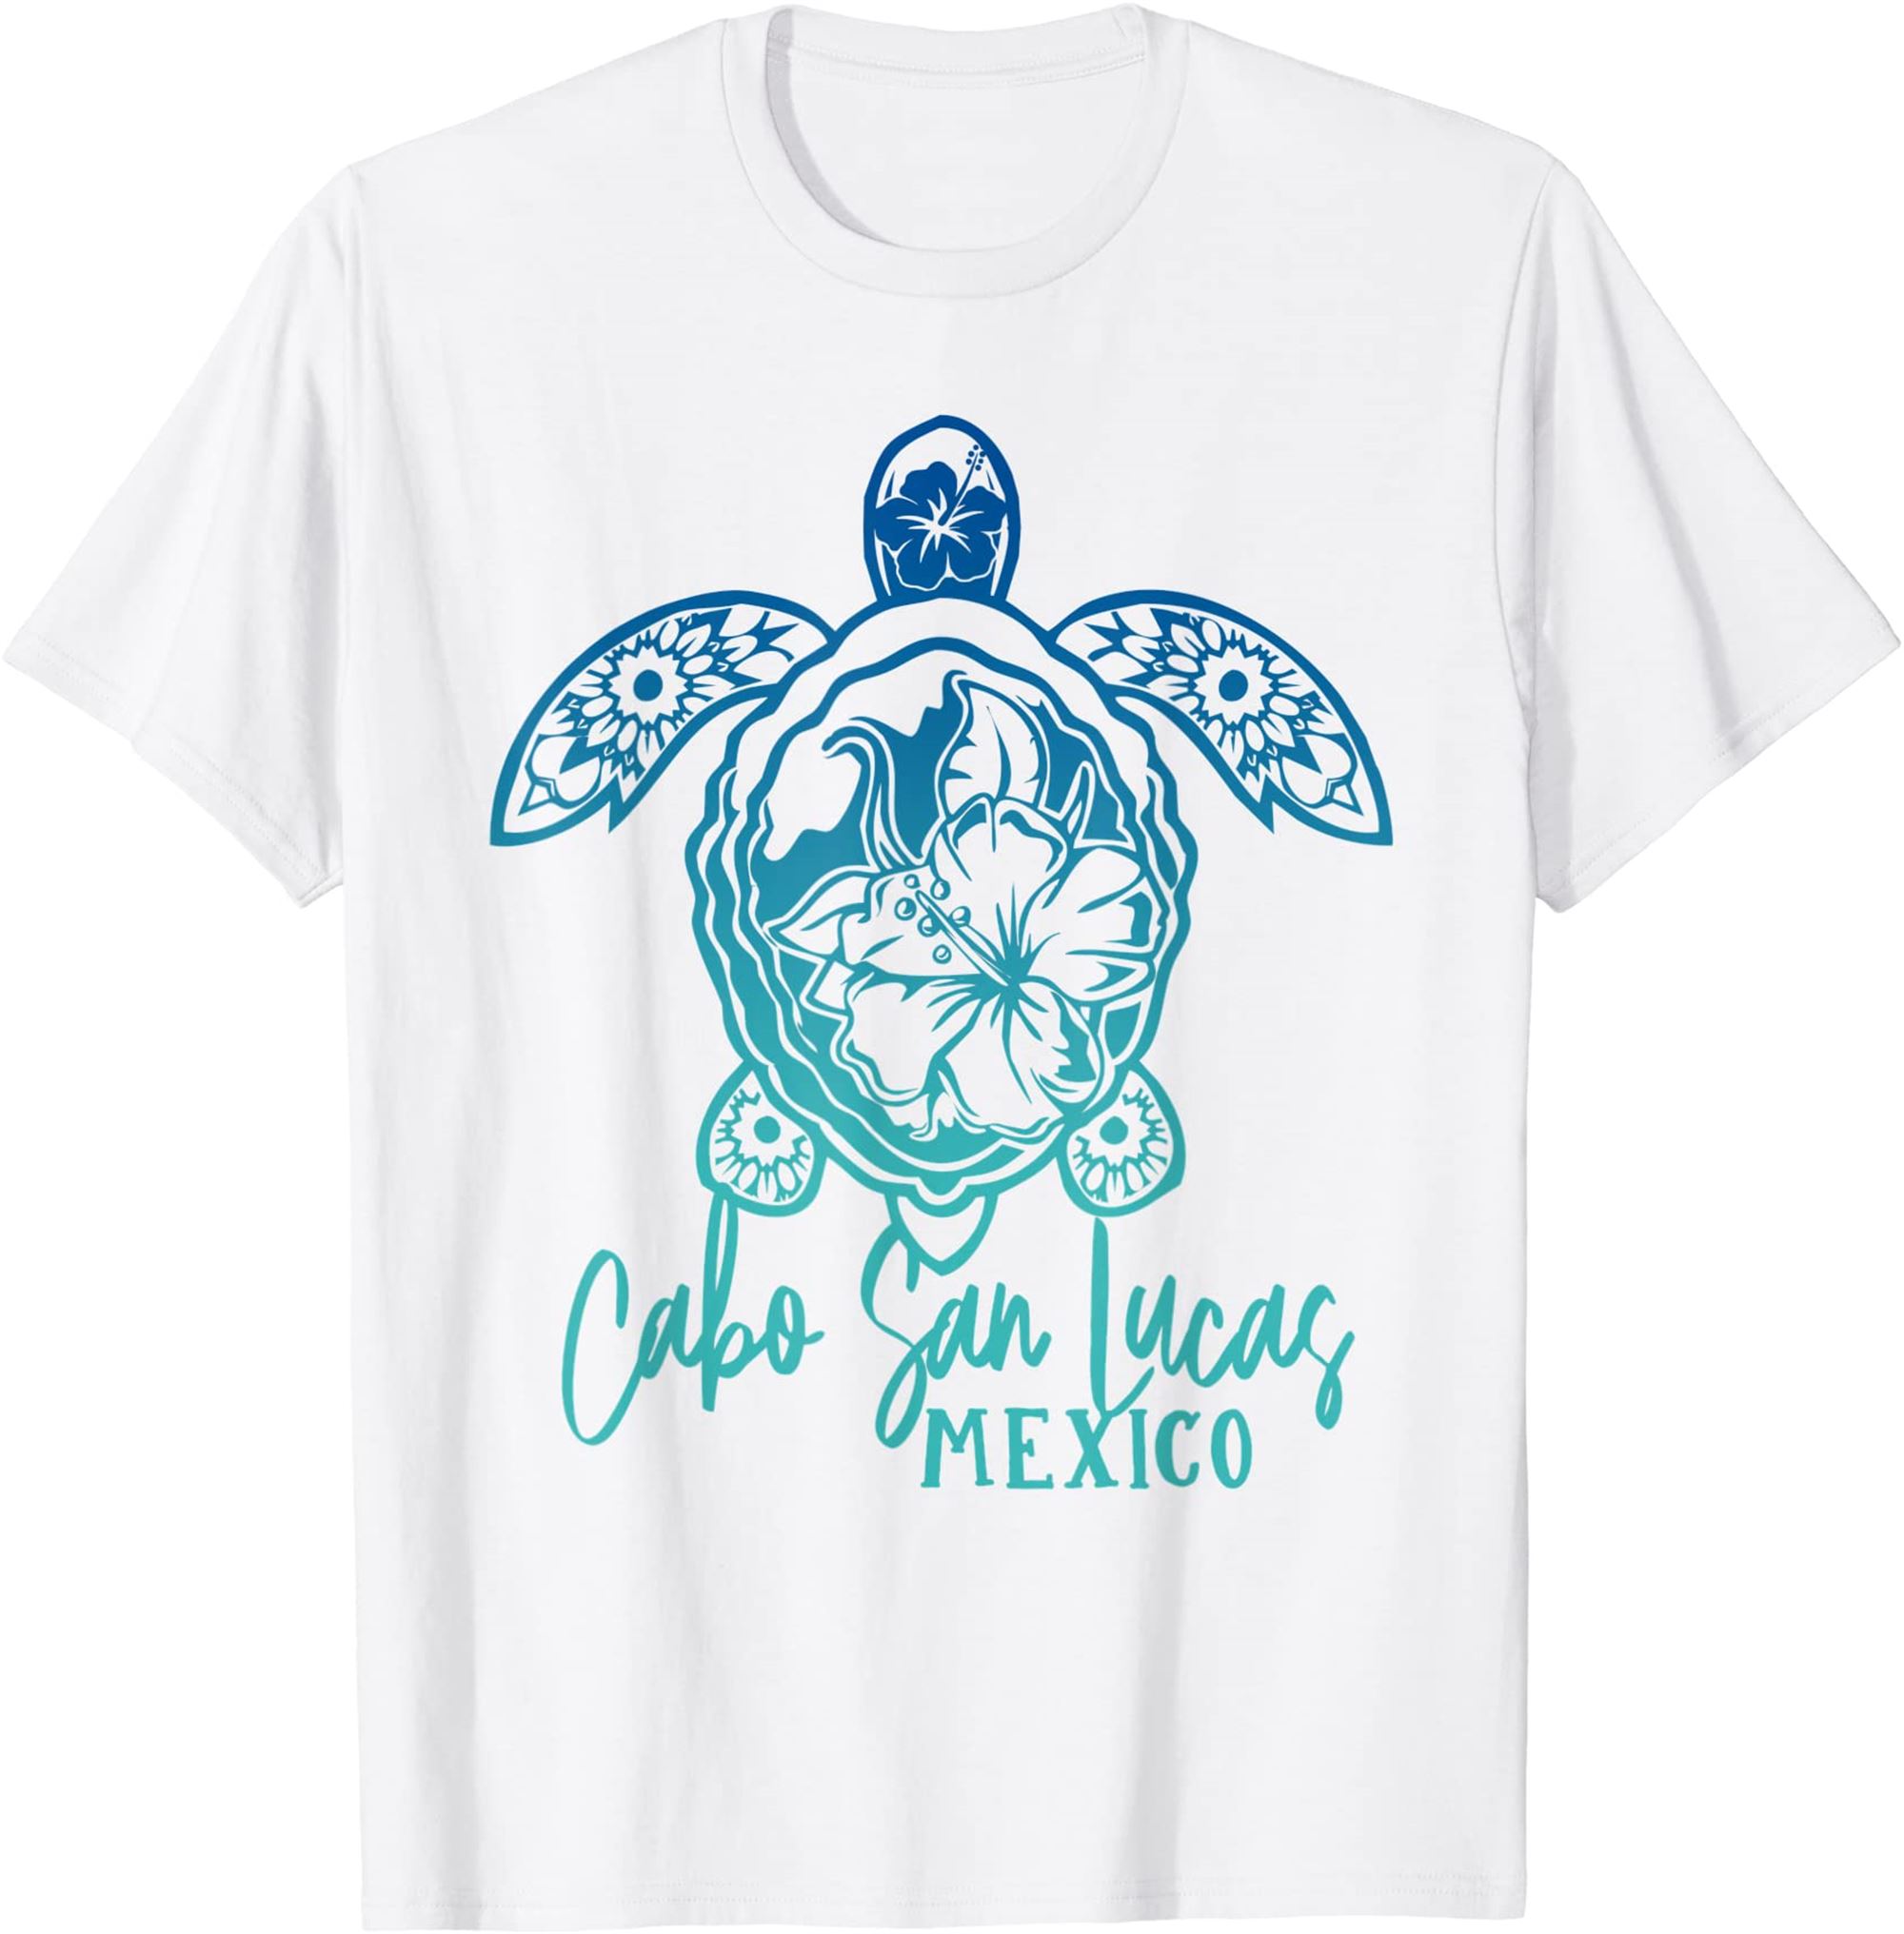 Cabo San Lucas Sea Turtles Mexico Turtle And Flower Tropical T-shirt Size Up To 5xl